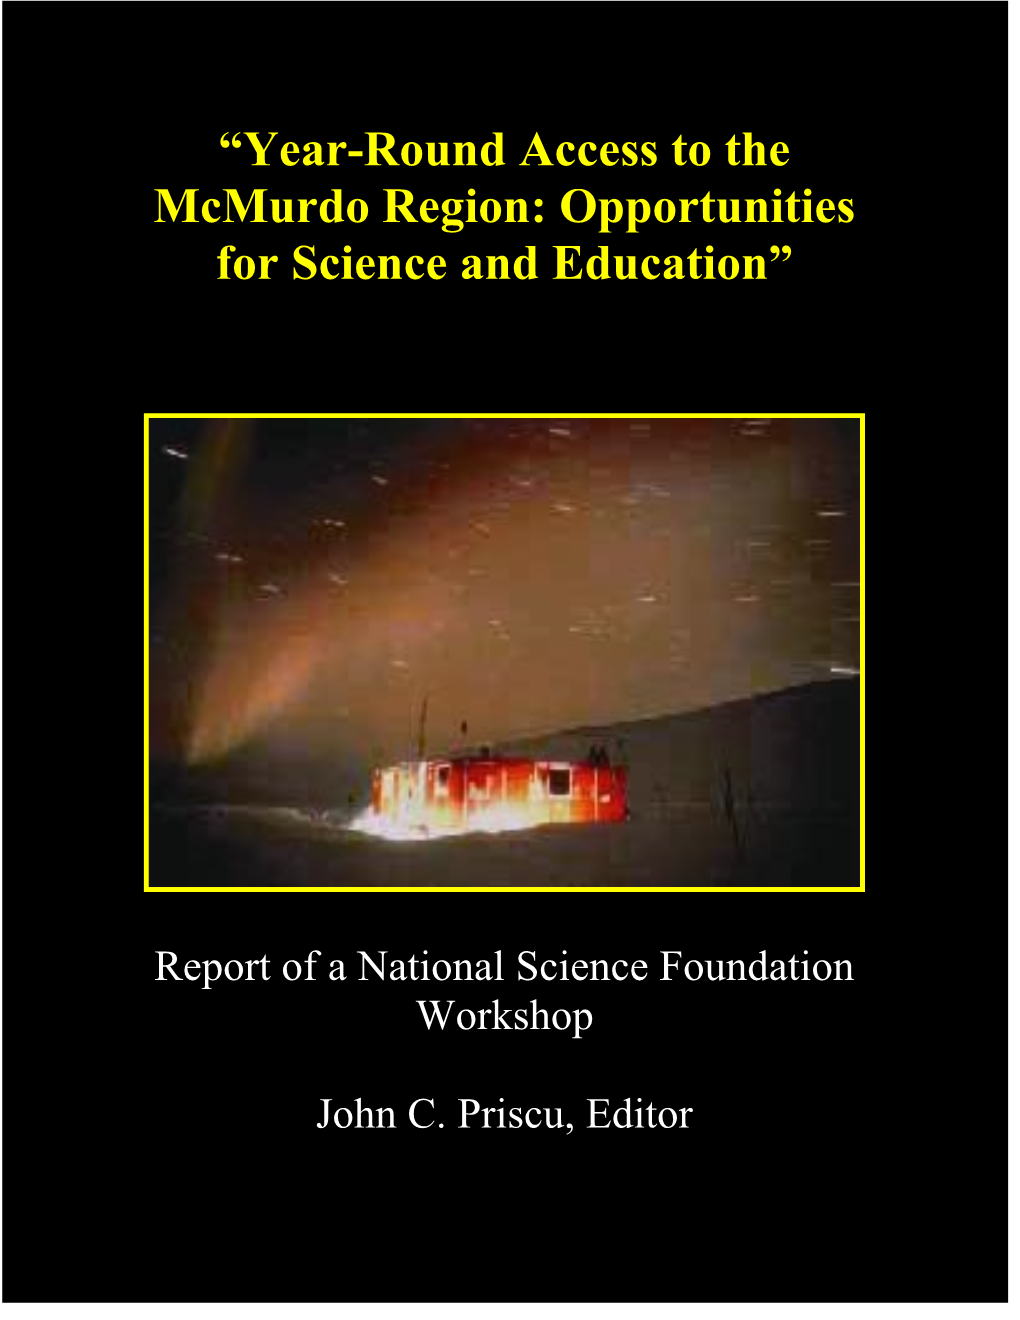 Year-Round Access to the Mcmurdo Region: Opportunities for Science and Education”